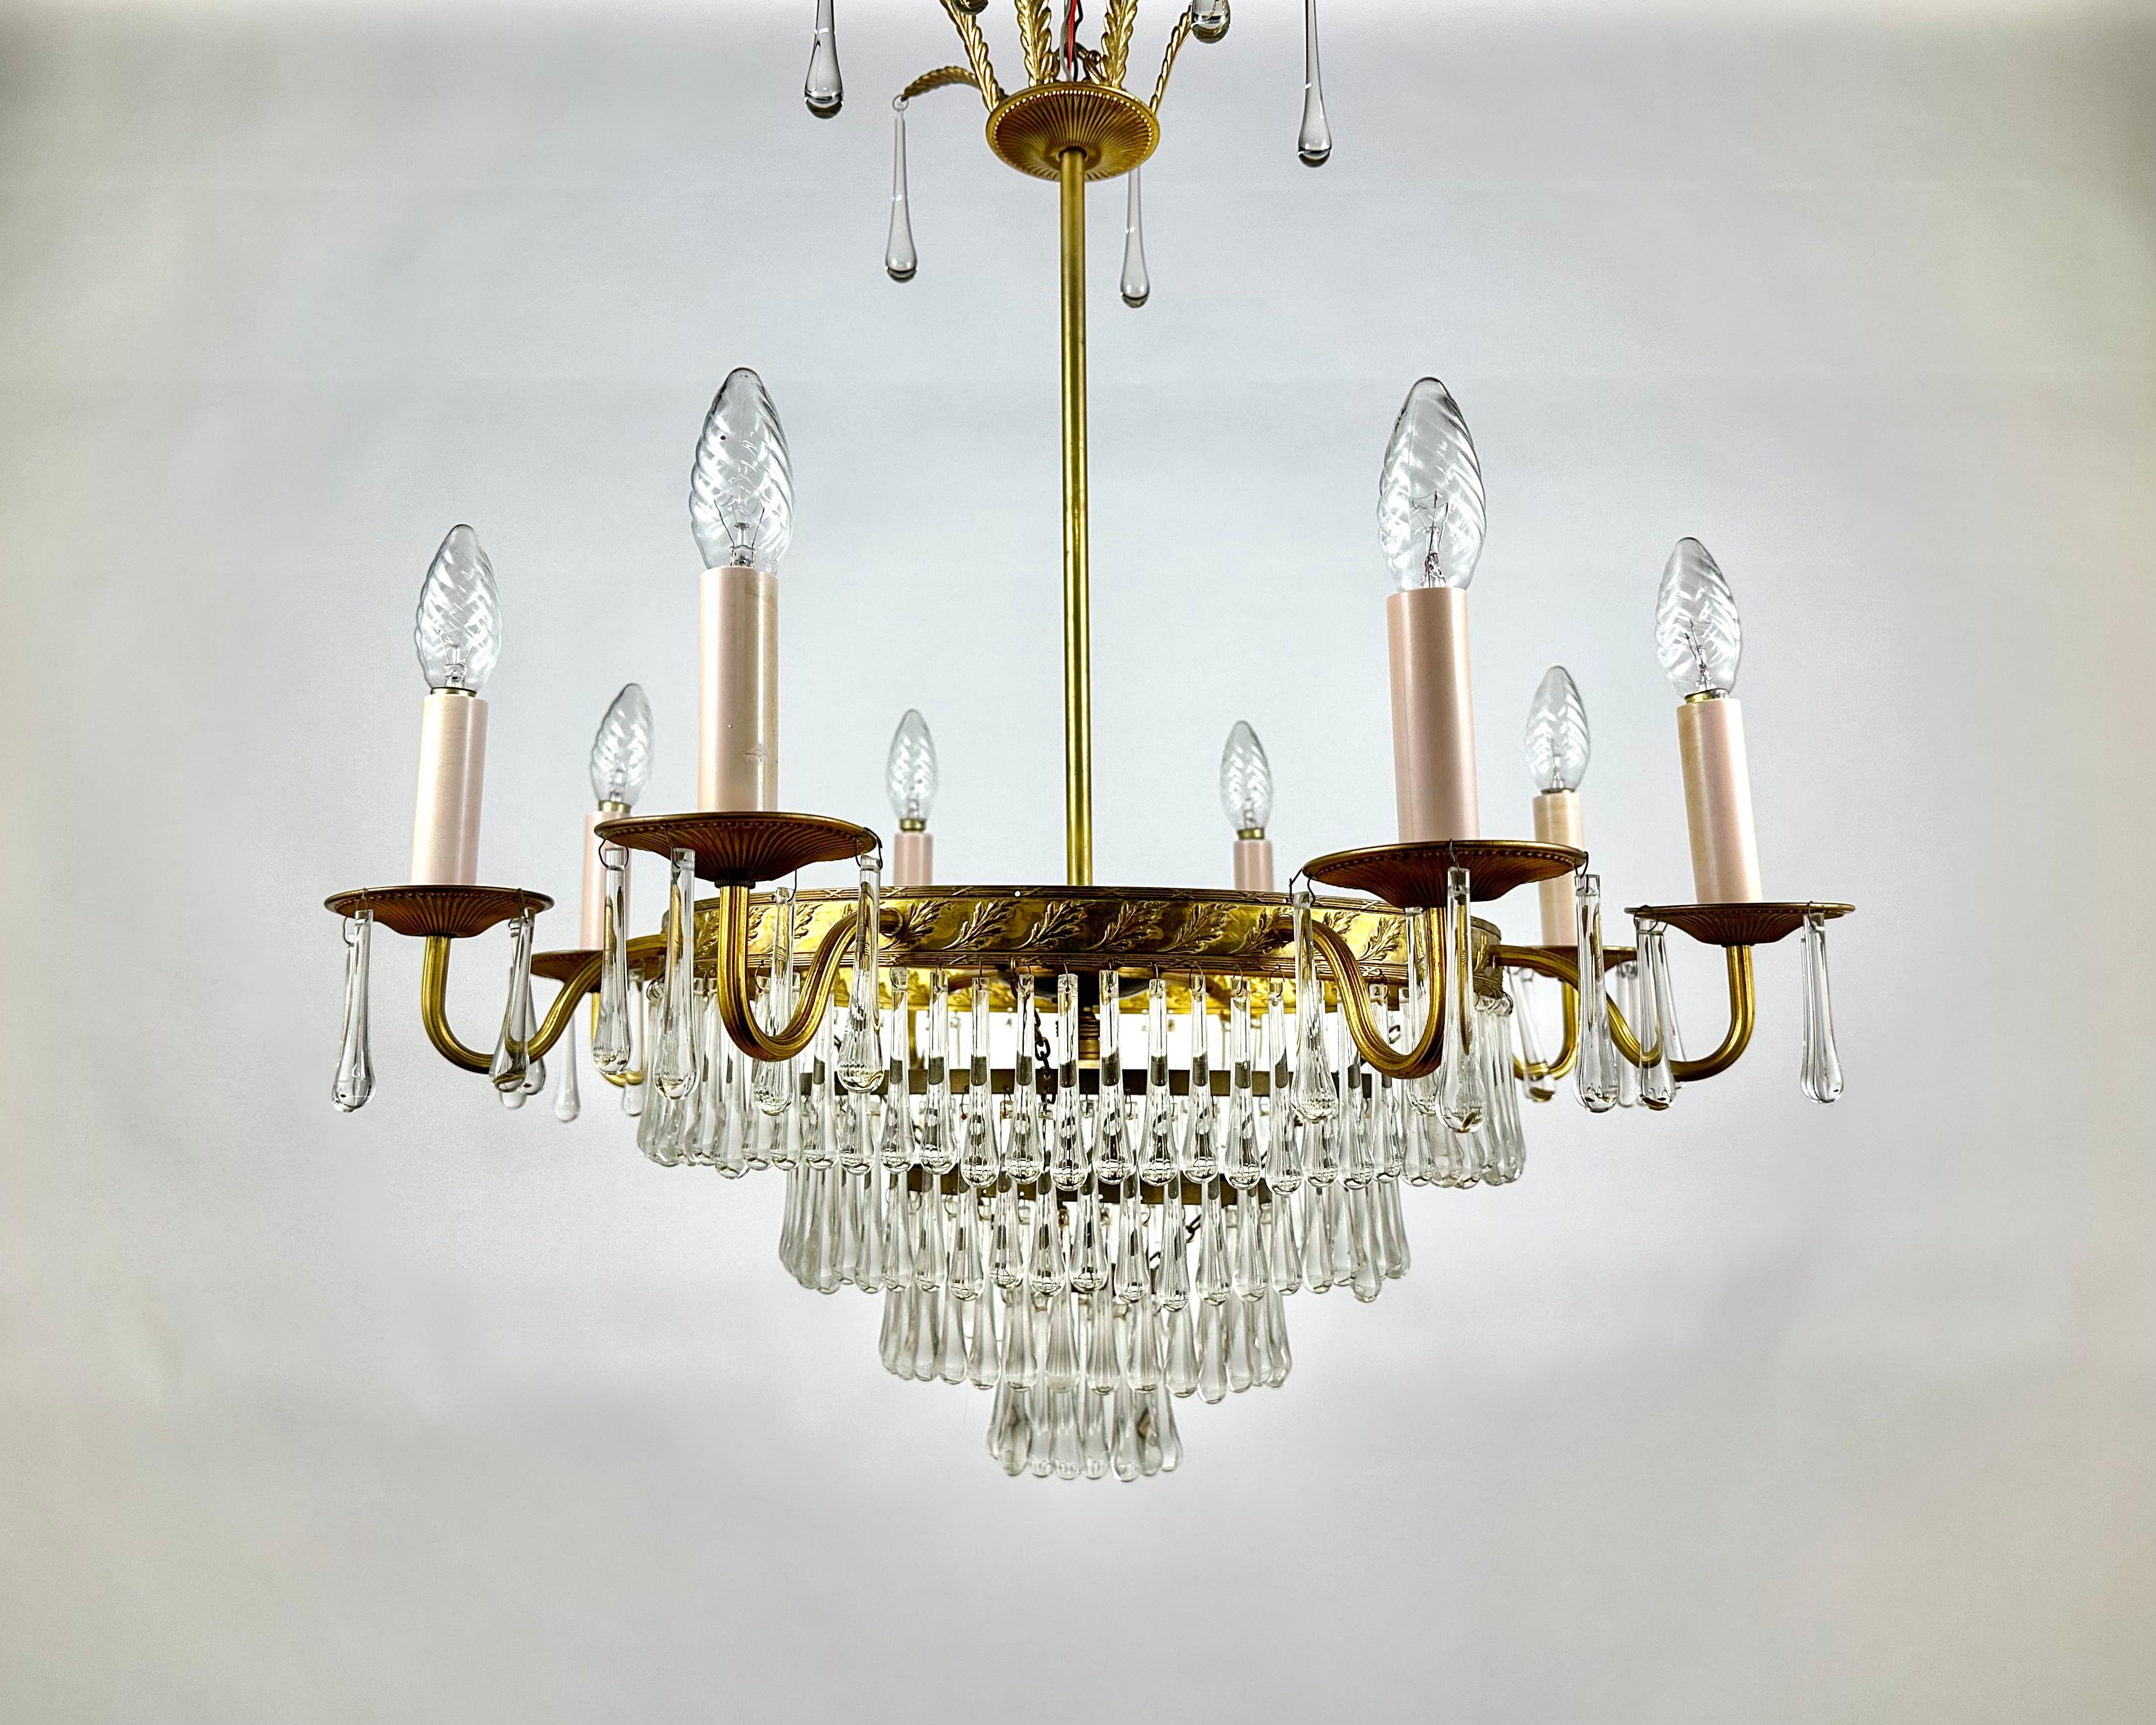 Luxurious Cascading Crystal And Brass Chandelier from France 1960s.

Crystal and brass chandelier is the quality in every detail of the lighting fixture.

Brass frame of gold color and crystal transparent details perfectly complement the interior of